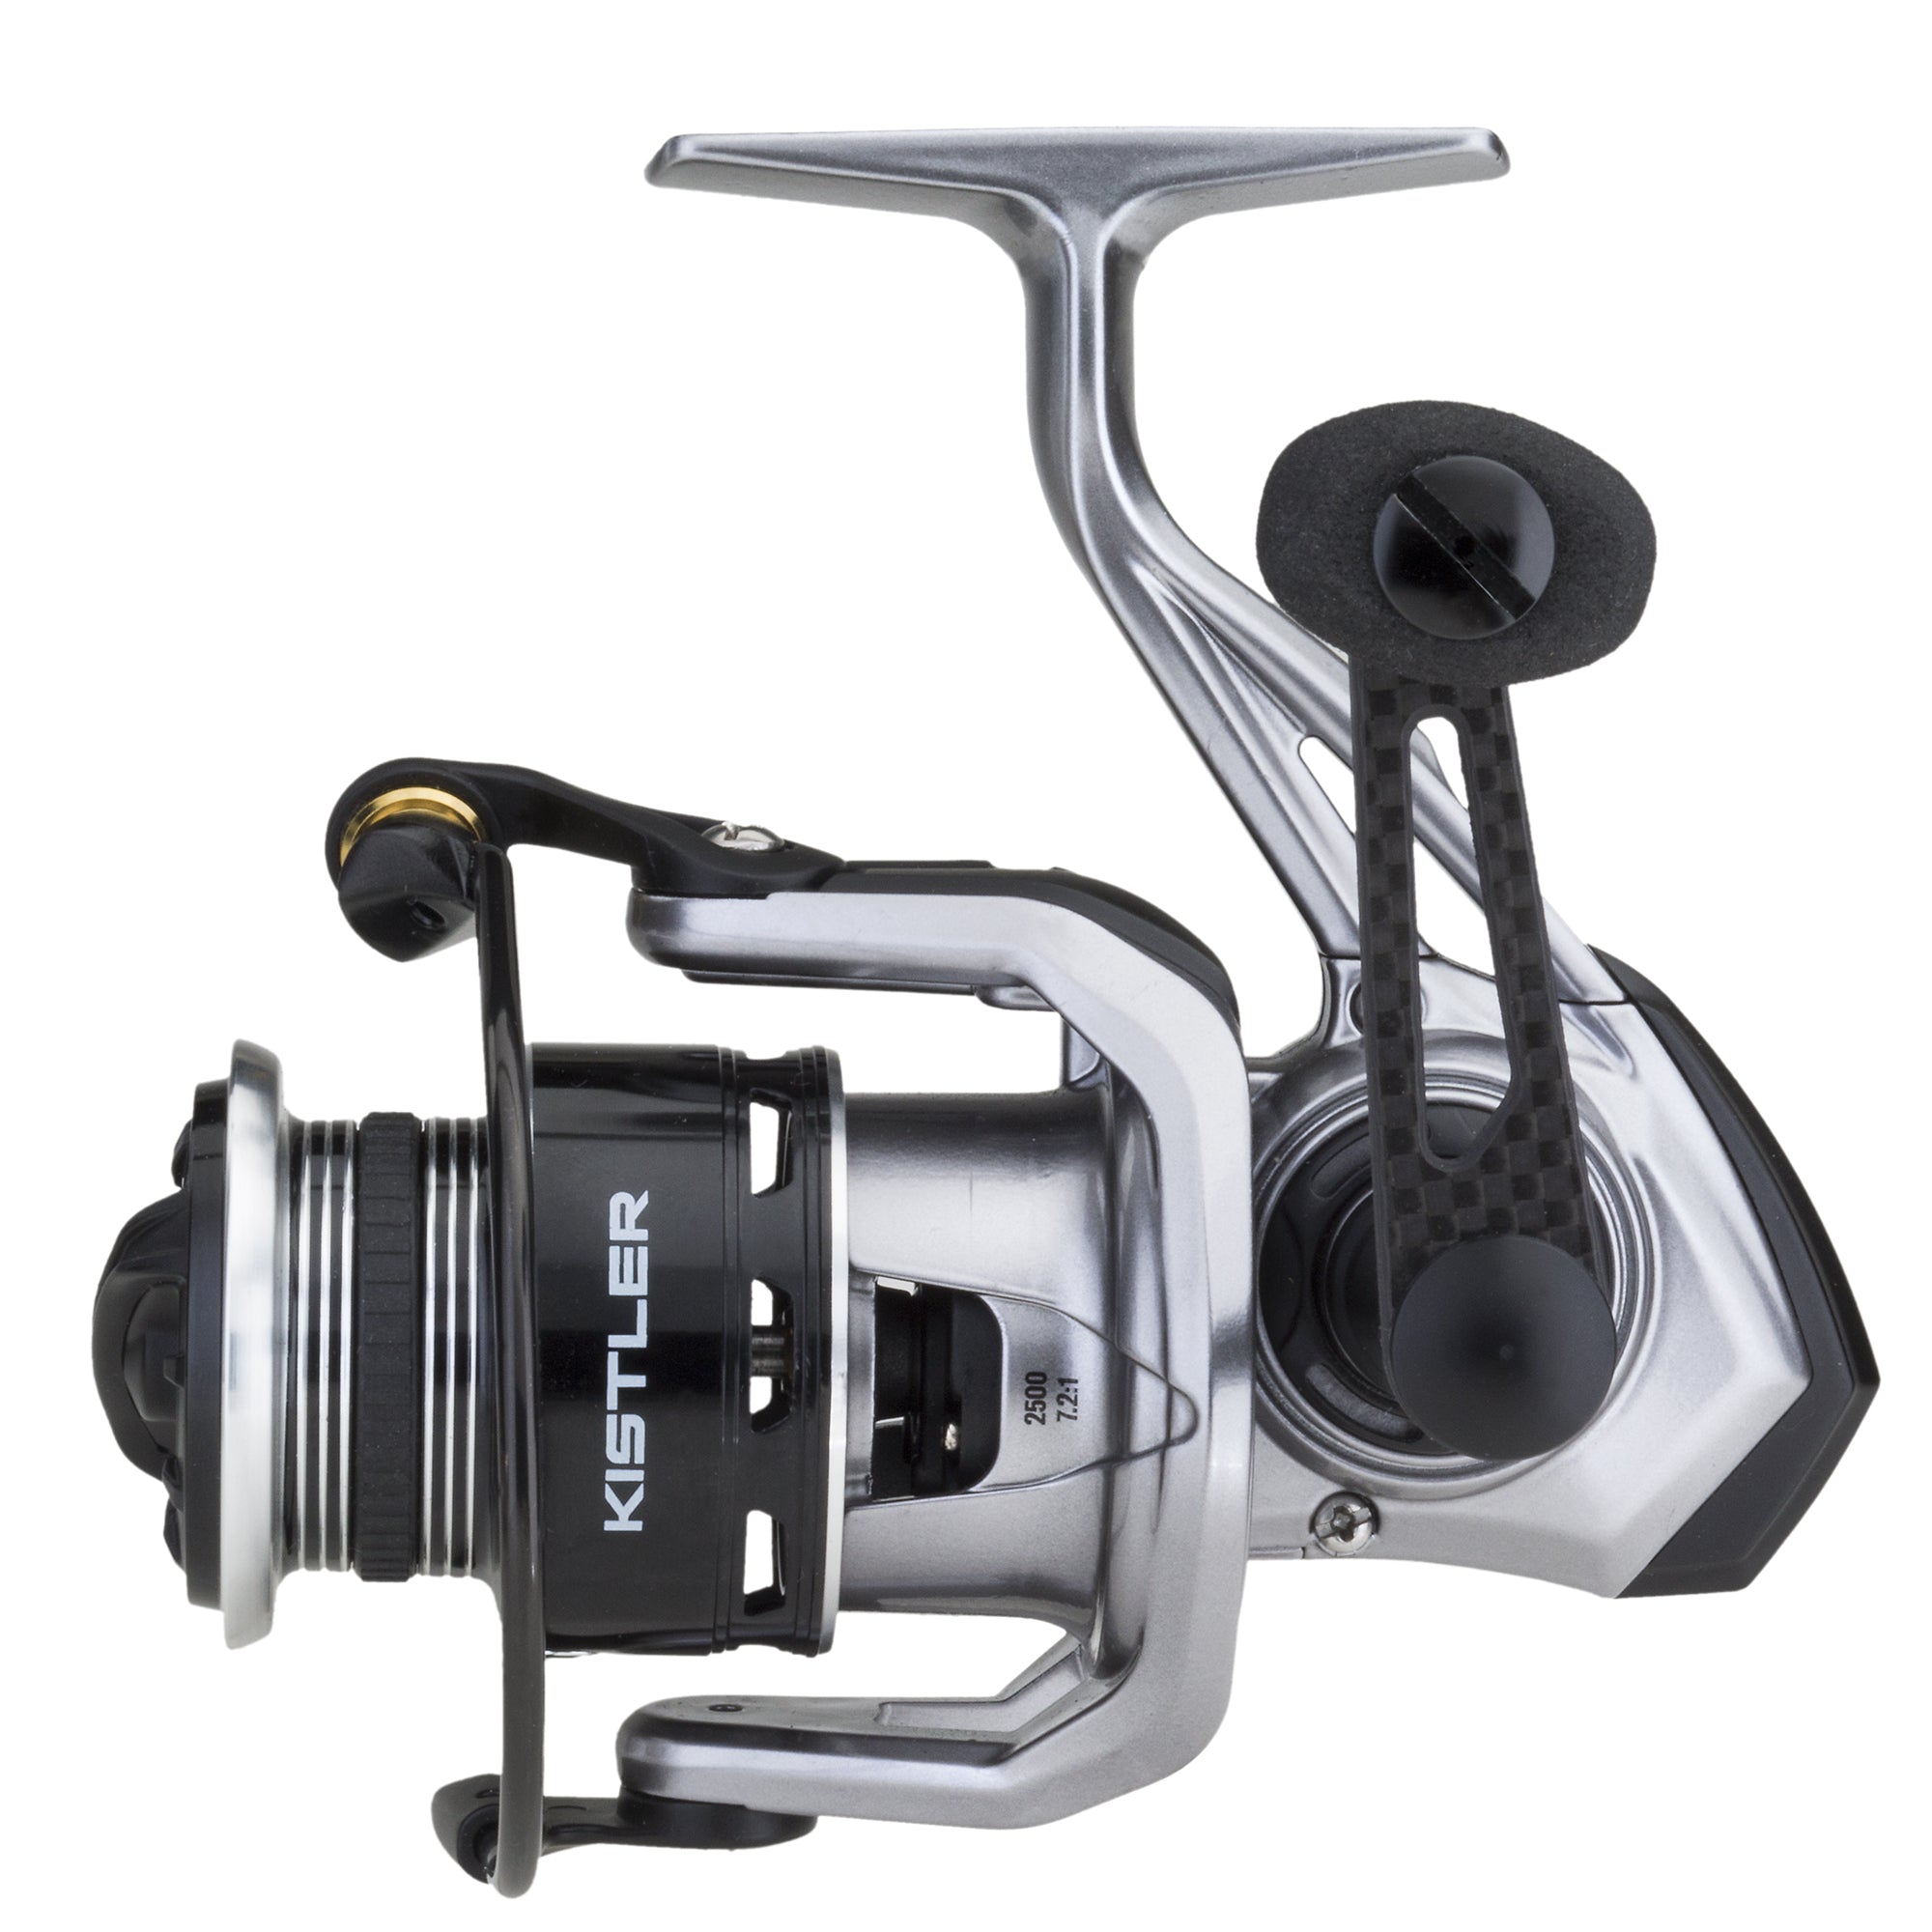 Best Trout Fishing Spinning Reels In 2020 – Reviews From Expert